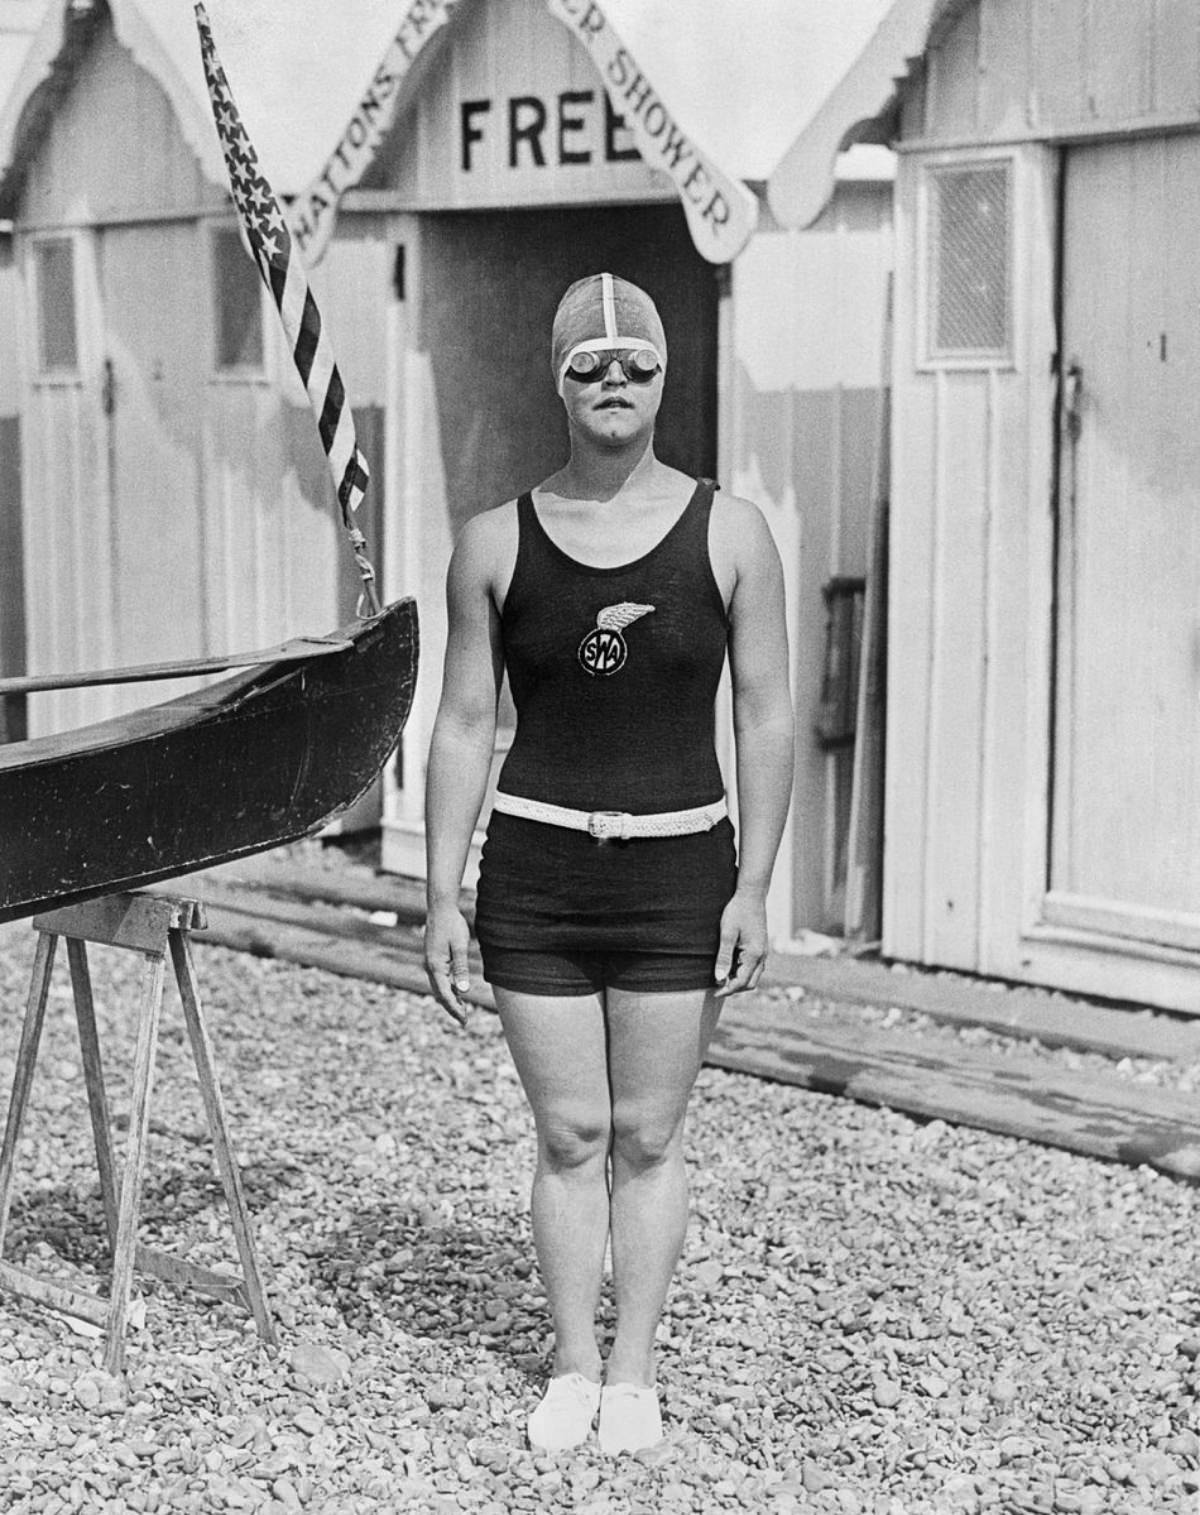 The Day Gertrude Ederle Shattered Records and Became the First Woman to Cross the Channel, 1926